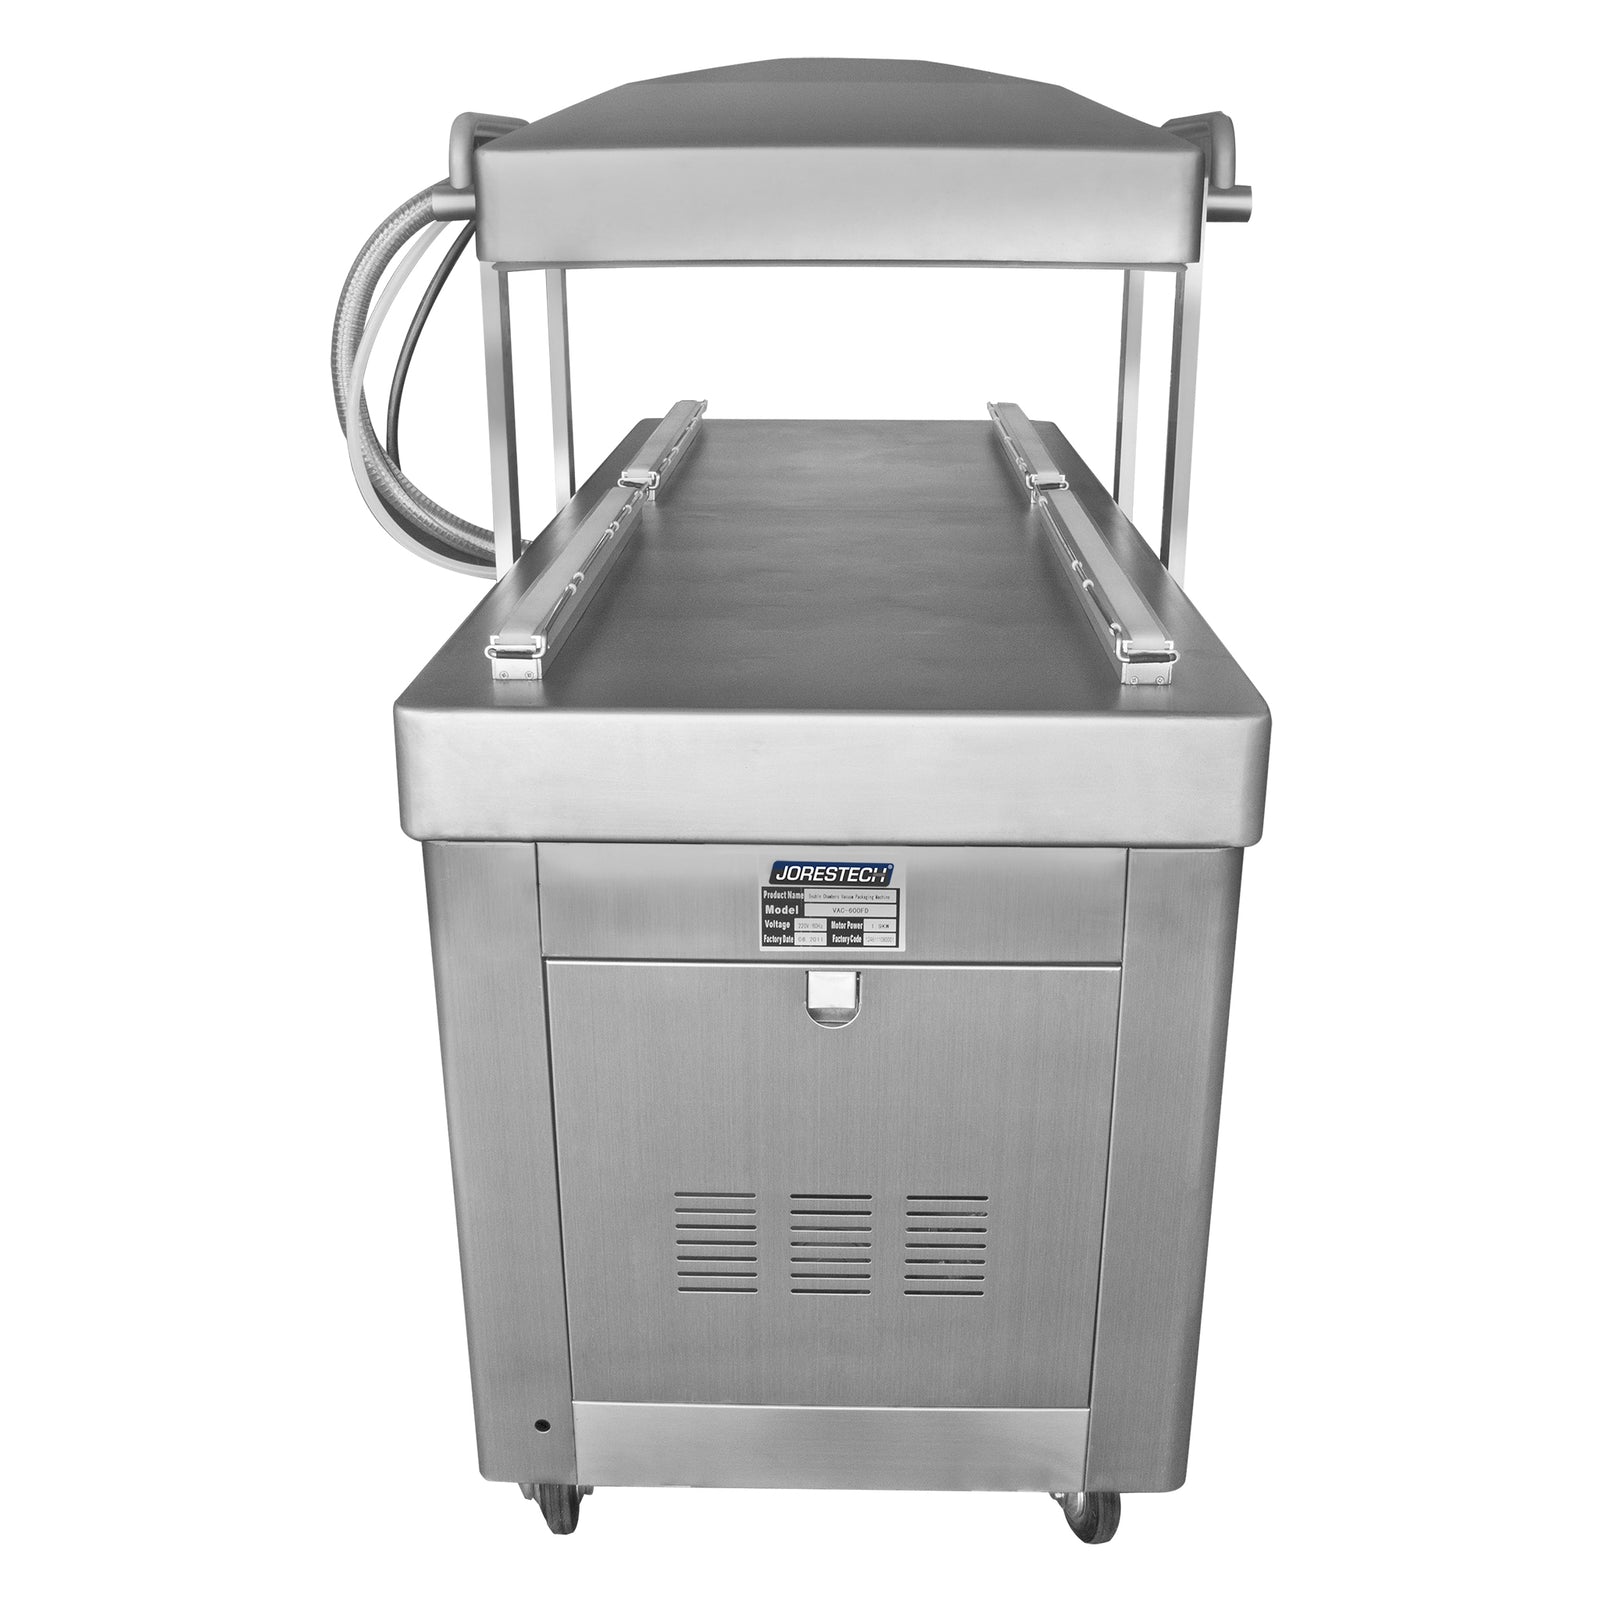 Side of the stainless steel 220v commercial dual chamber vacuum sealer with dual 23 inches seal bar. The machine is shown with the lid open so that heating seal bars can be appreciated